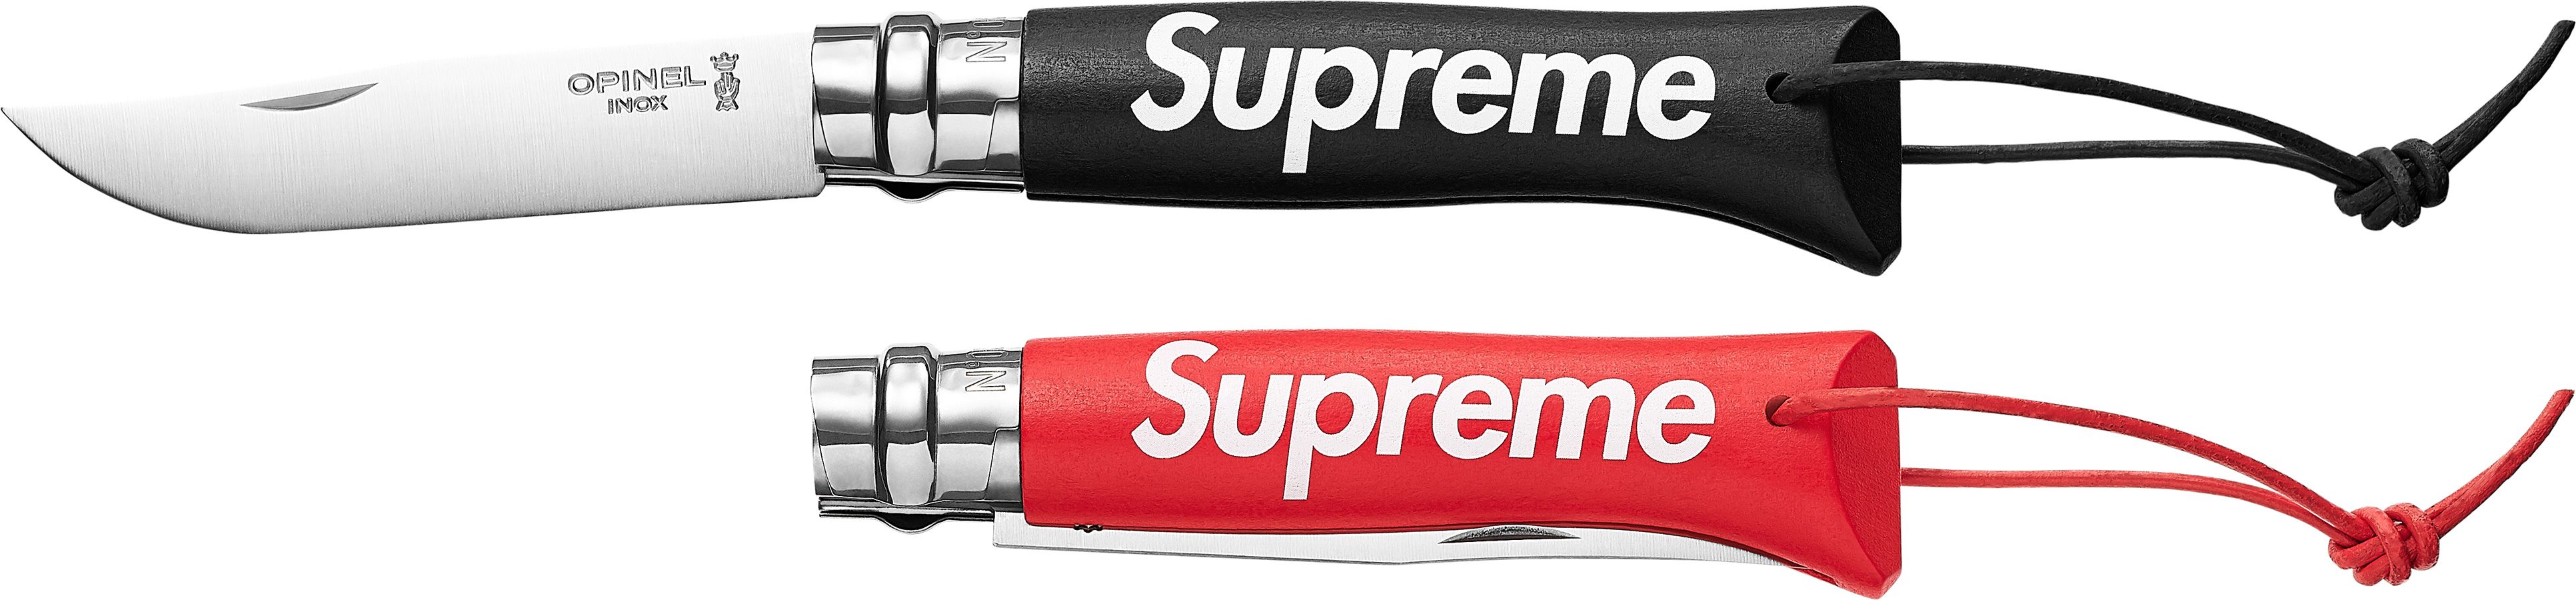 Supreme®/Opinel® No.08 Folding Knife - Fall/Winter 2020 Preview 